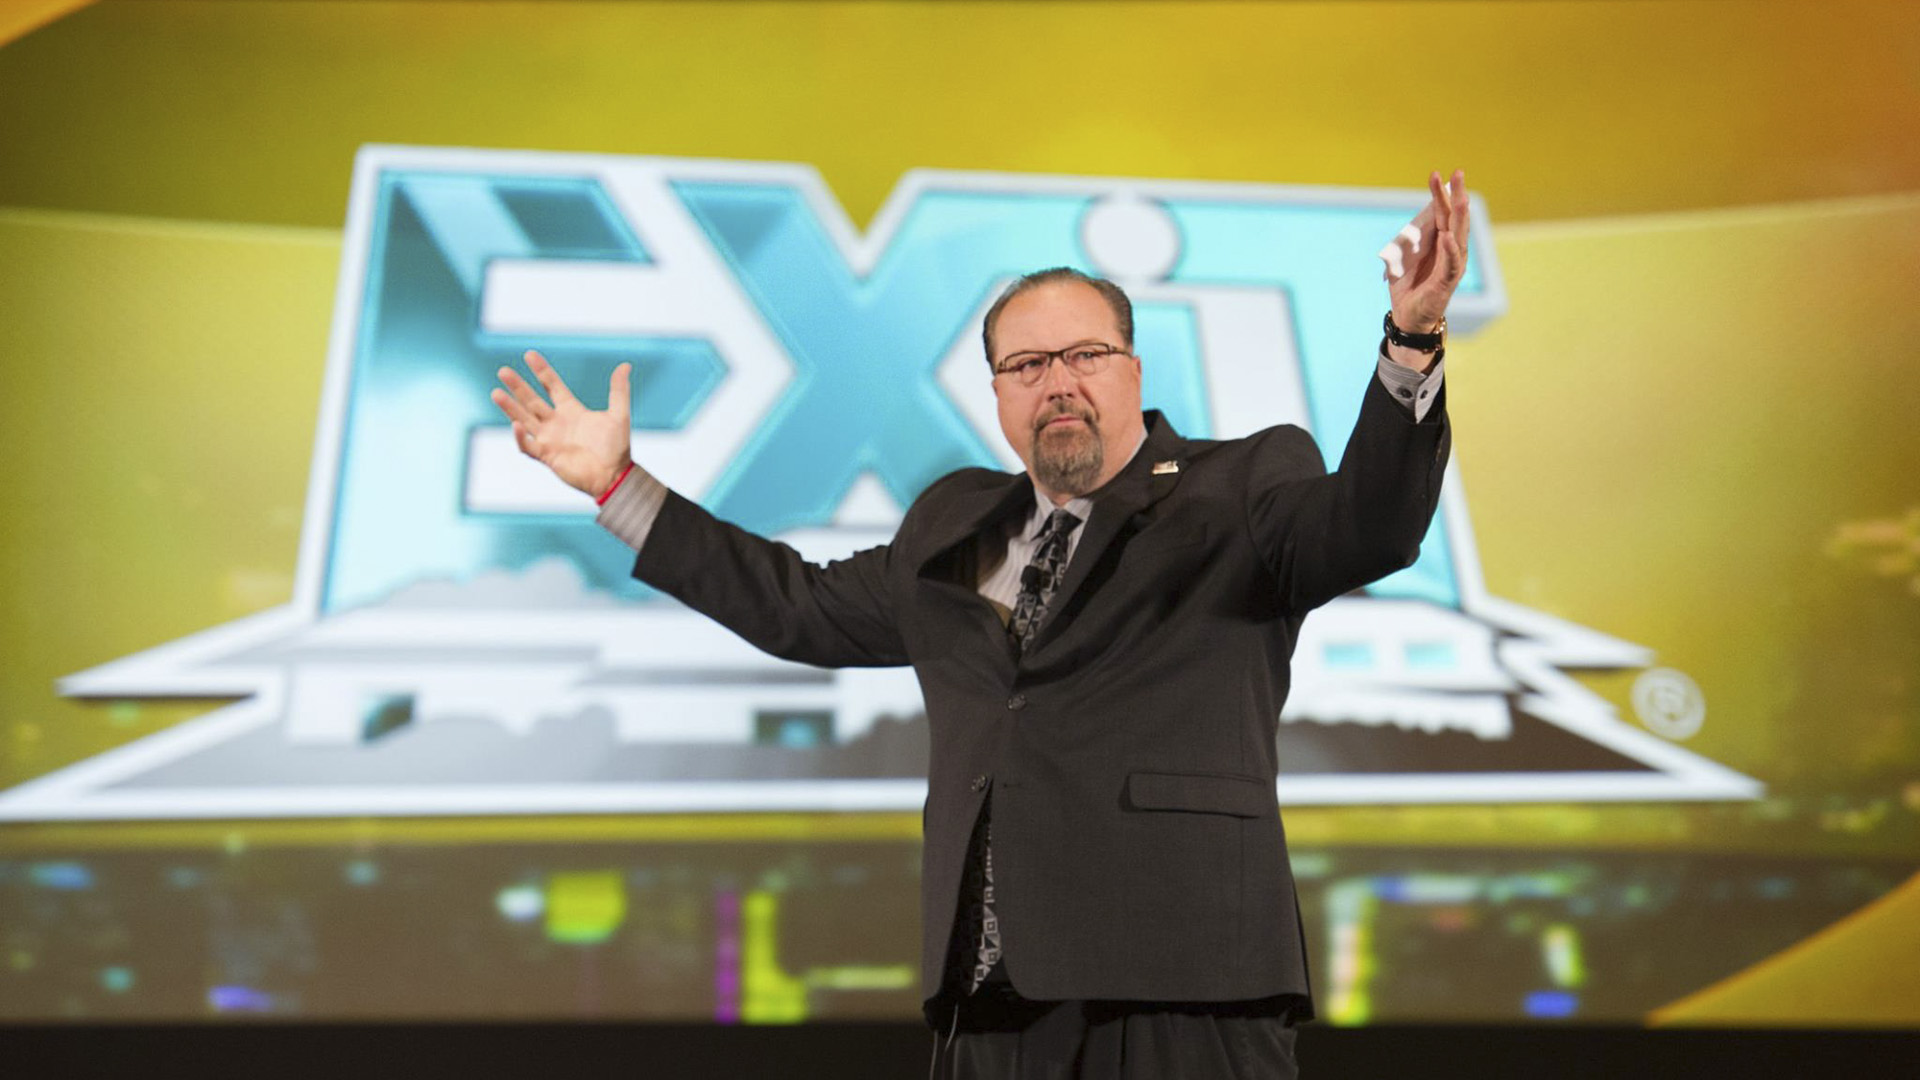 Unlock Your Real Estate Career with EXIT Realty Franchise